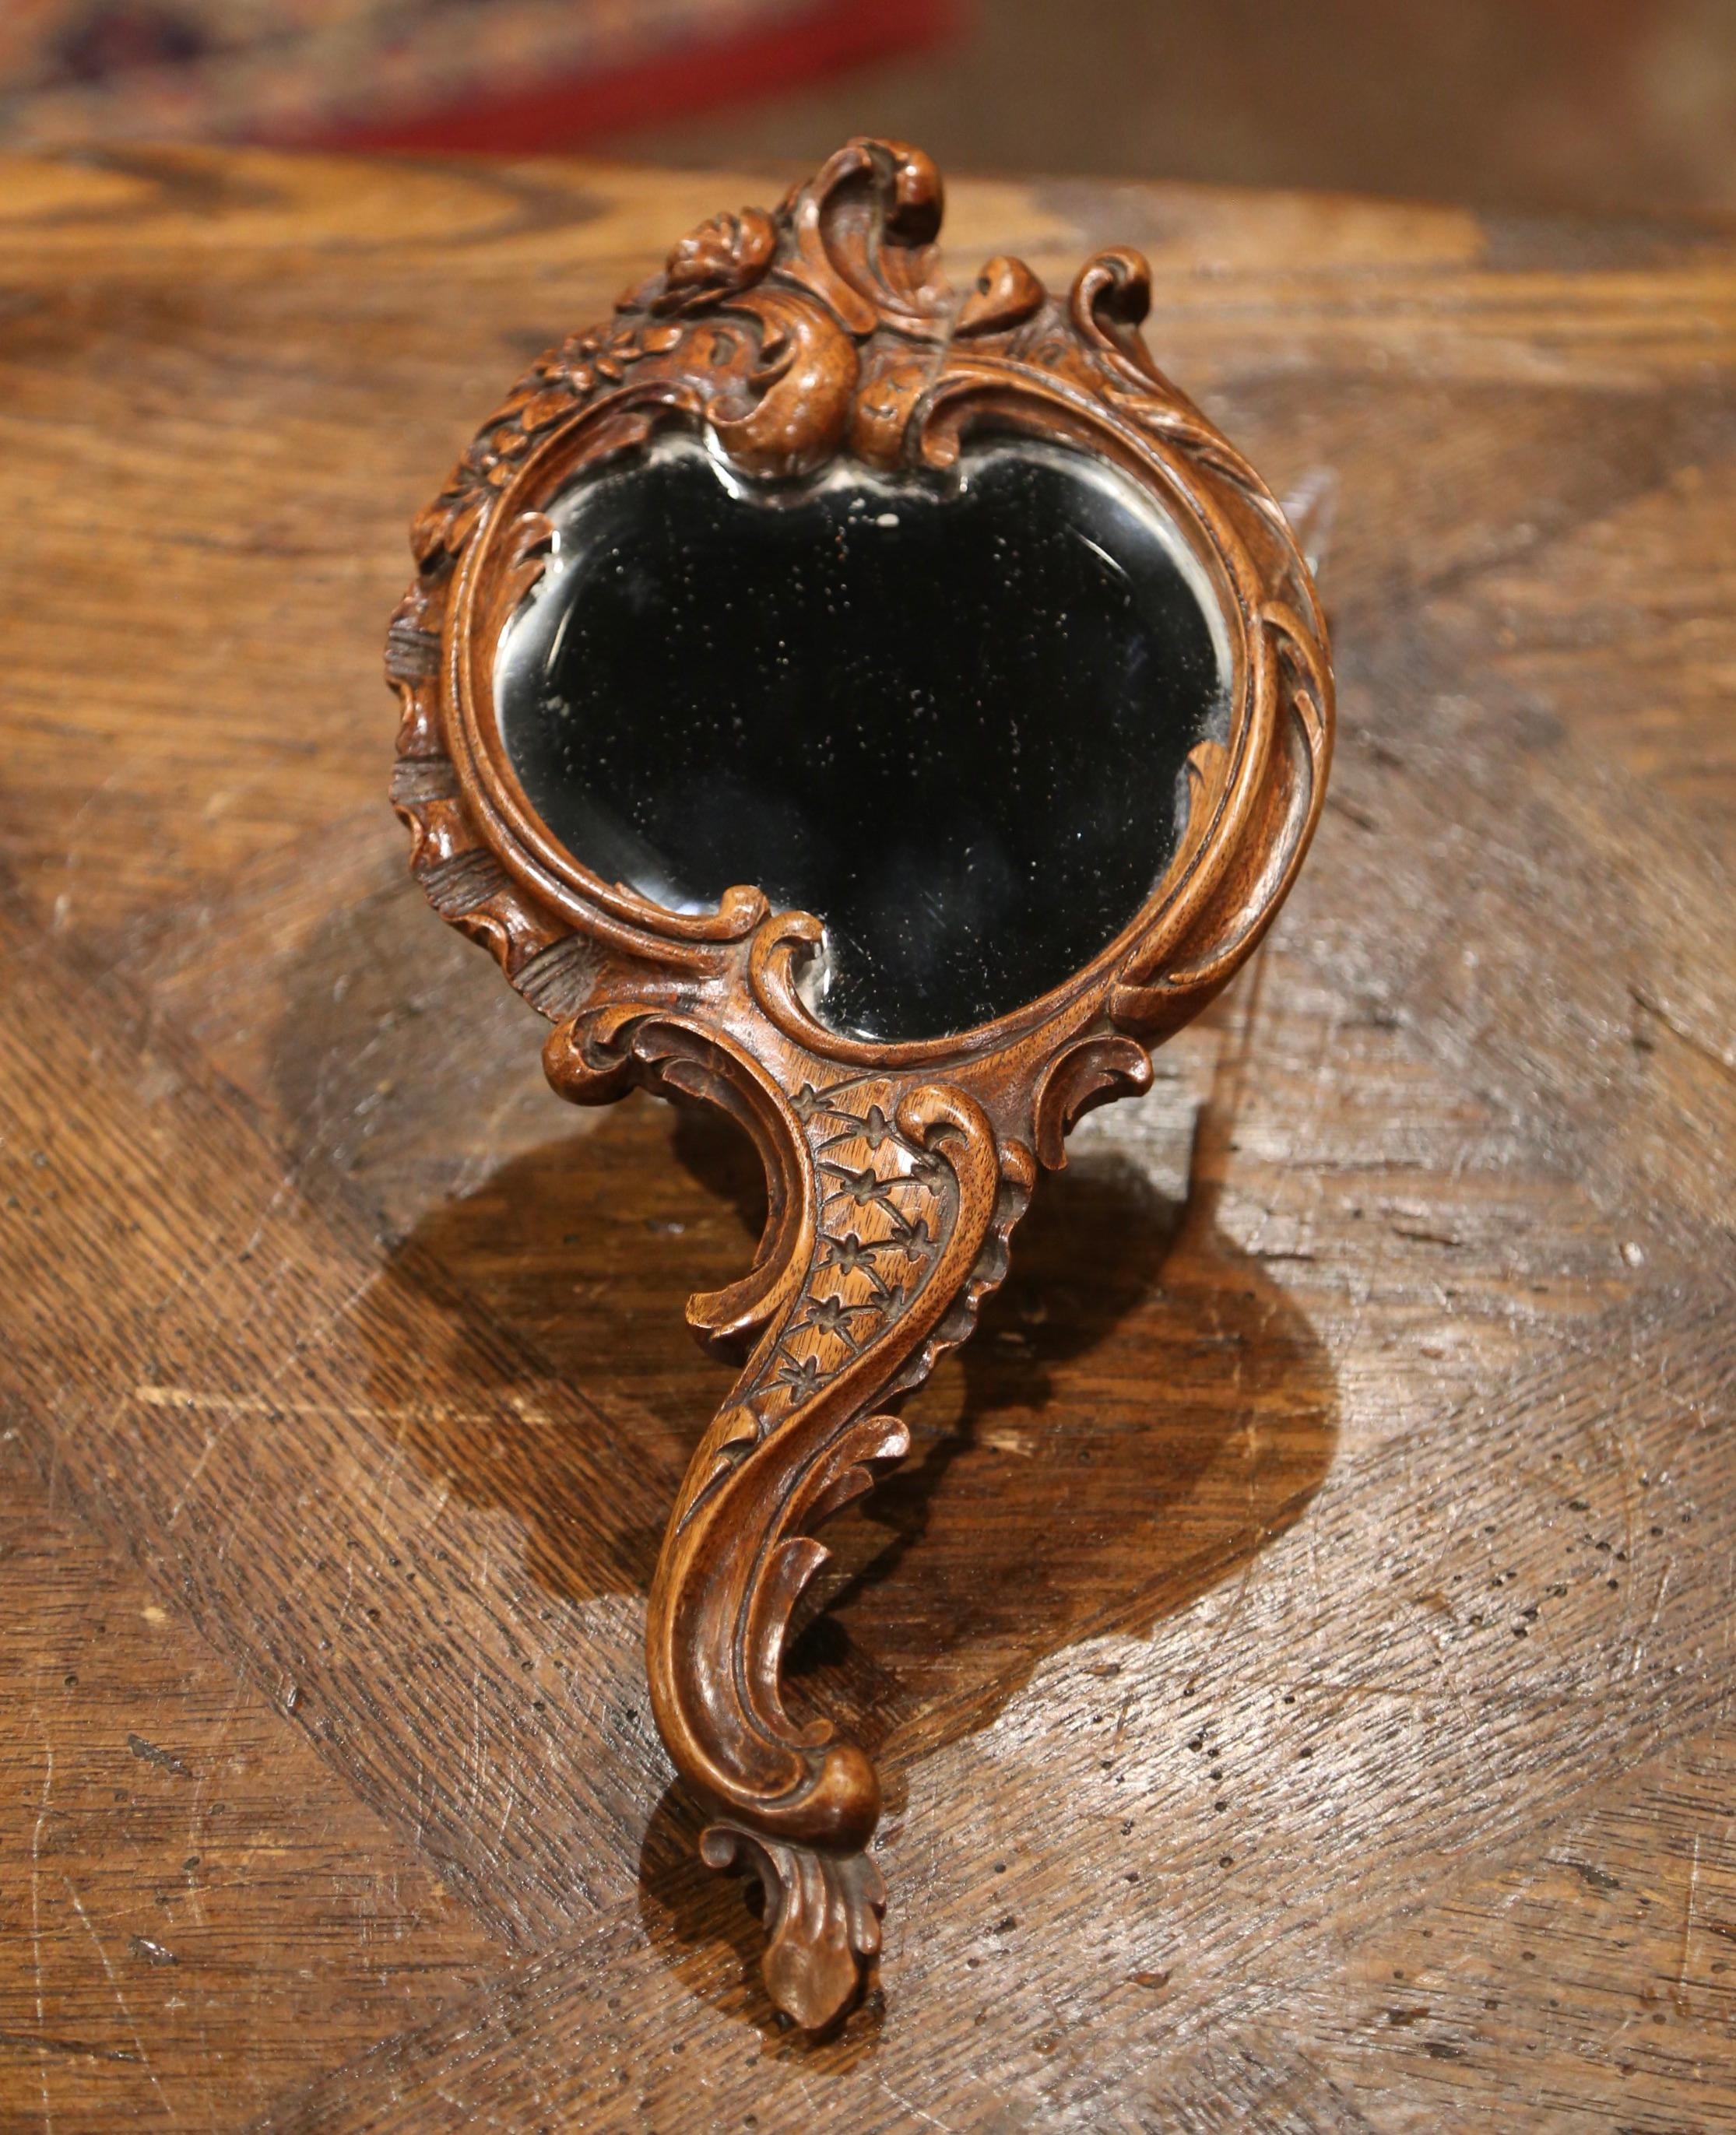 Crafted in France circa 1870, the antique Louis XV style hand mirror with elegant serpentine handle, features hand carved floral and leaf motifs throughout the frame; the vanity mirror has the original beveled mercury glass. The petite table mirror